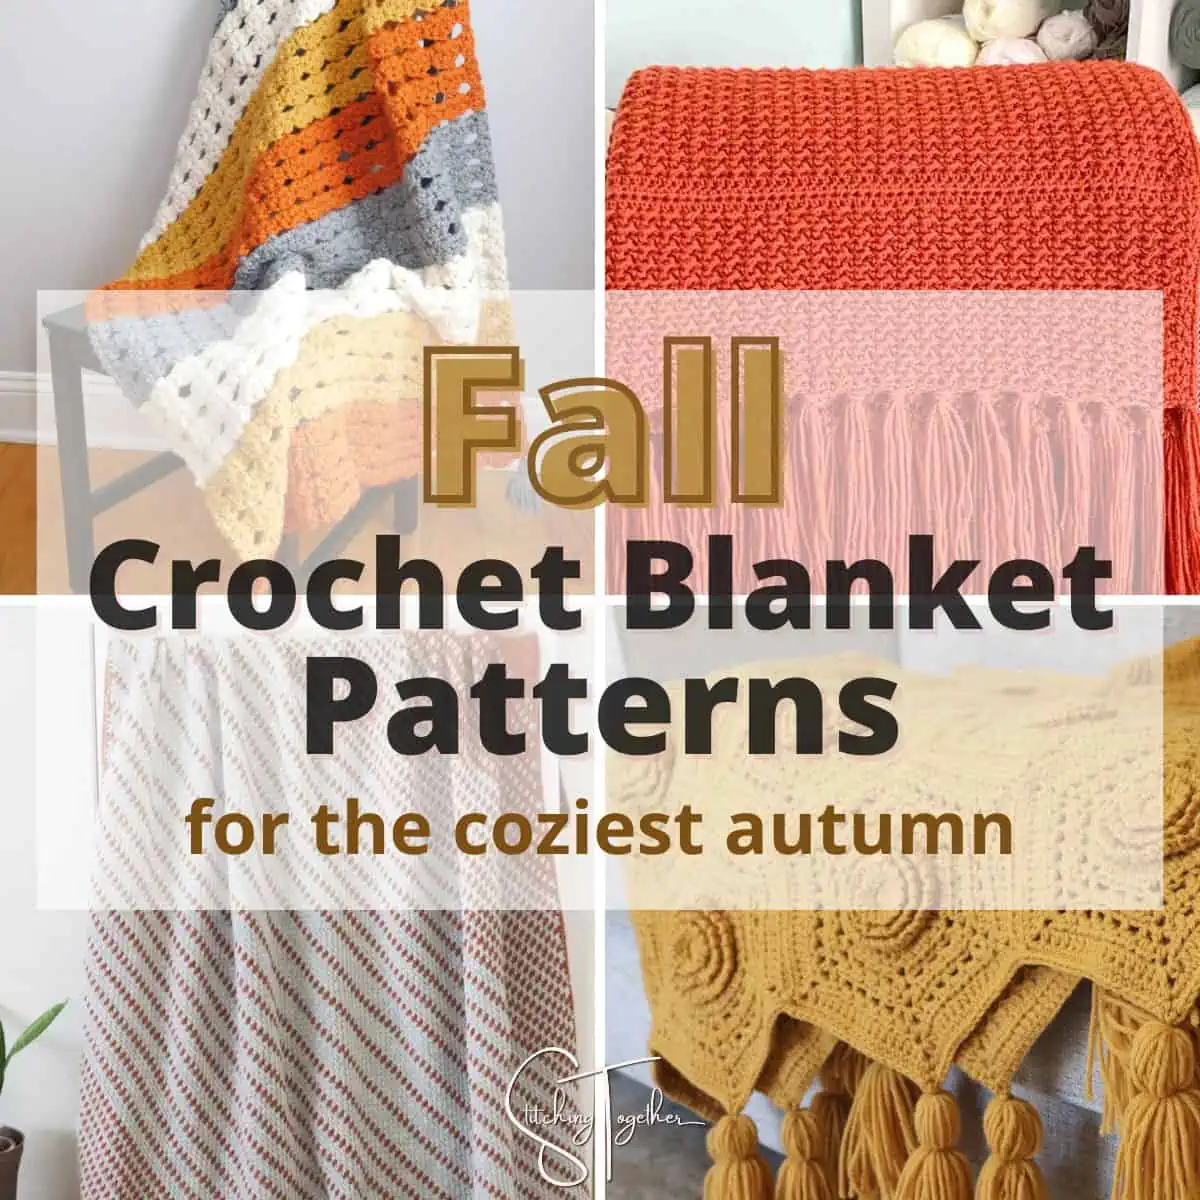 collage image of different crochet blanket patterns with text overlay reading "fall crochet blanket patterns for the coziest autumn"